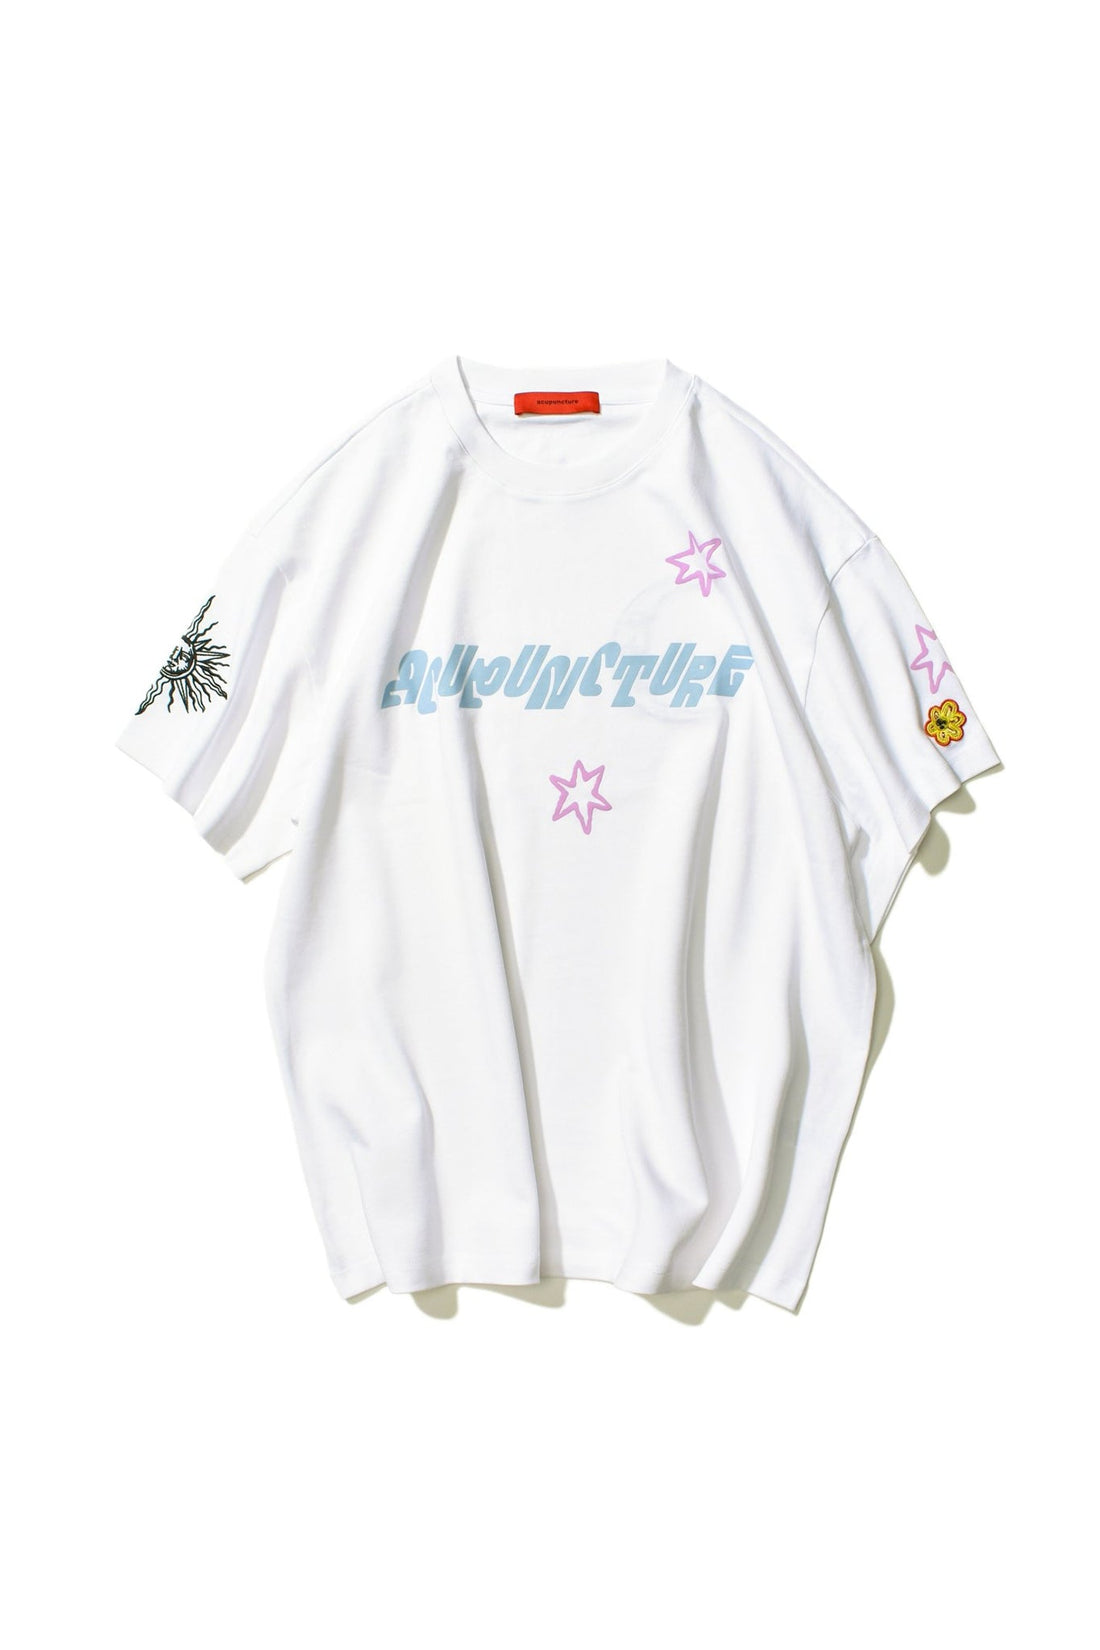 STAR MOON T-SHIRT WHITE Acupuncture